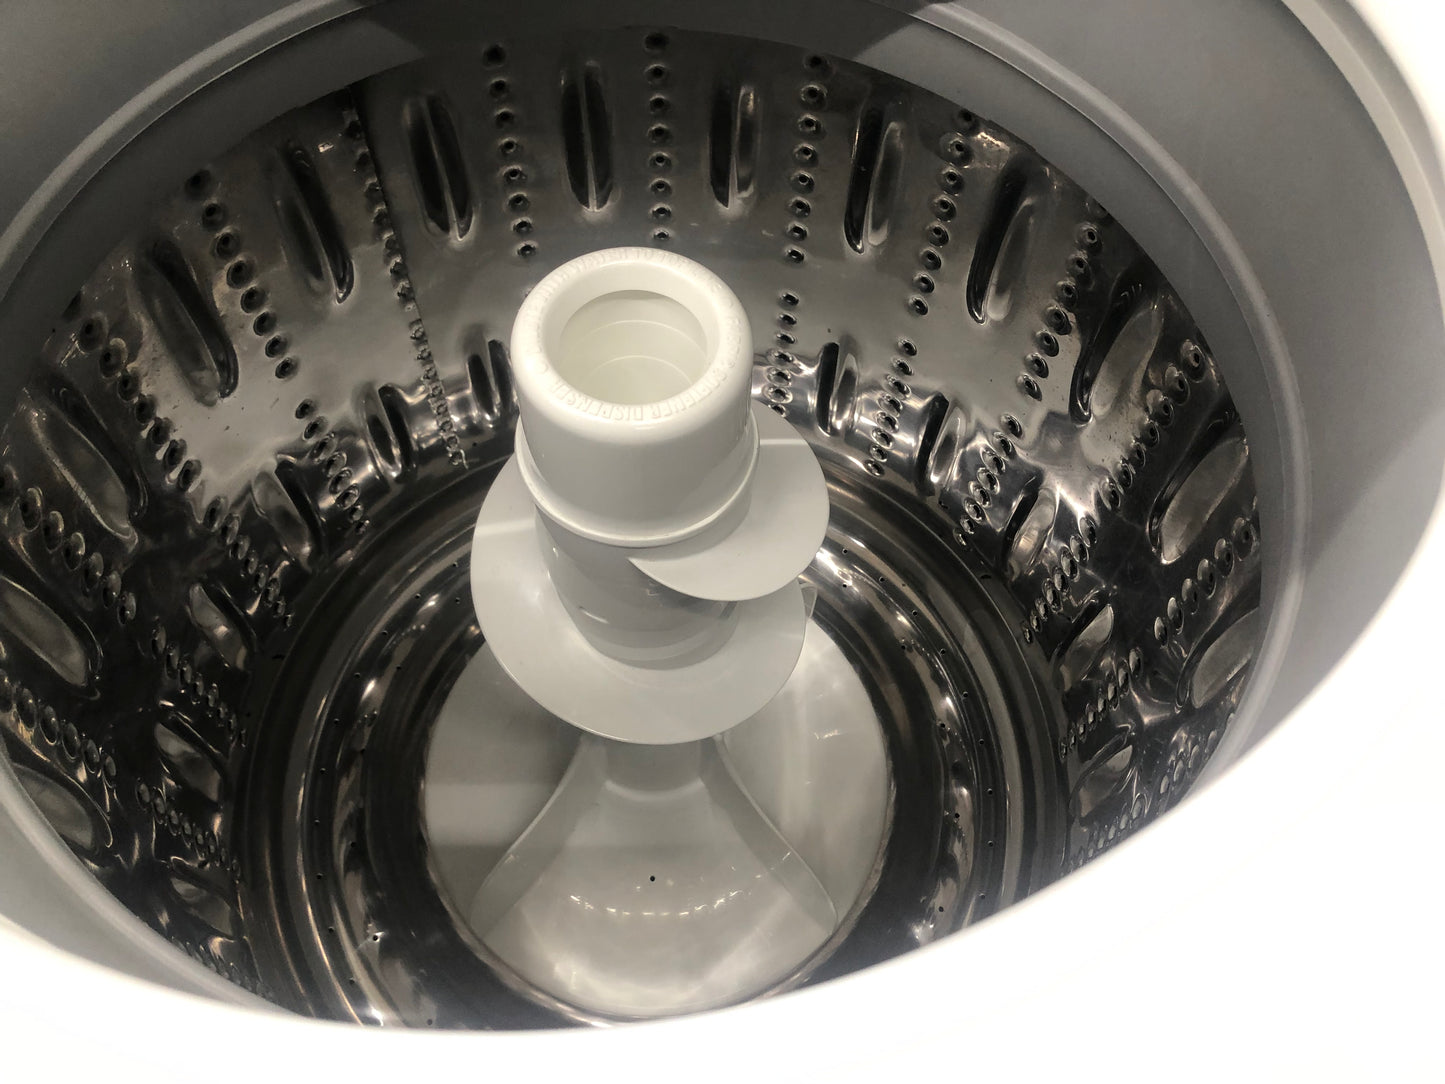 GE 3.8 cu ft Top Load Washer